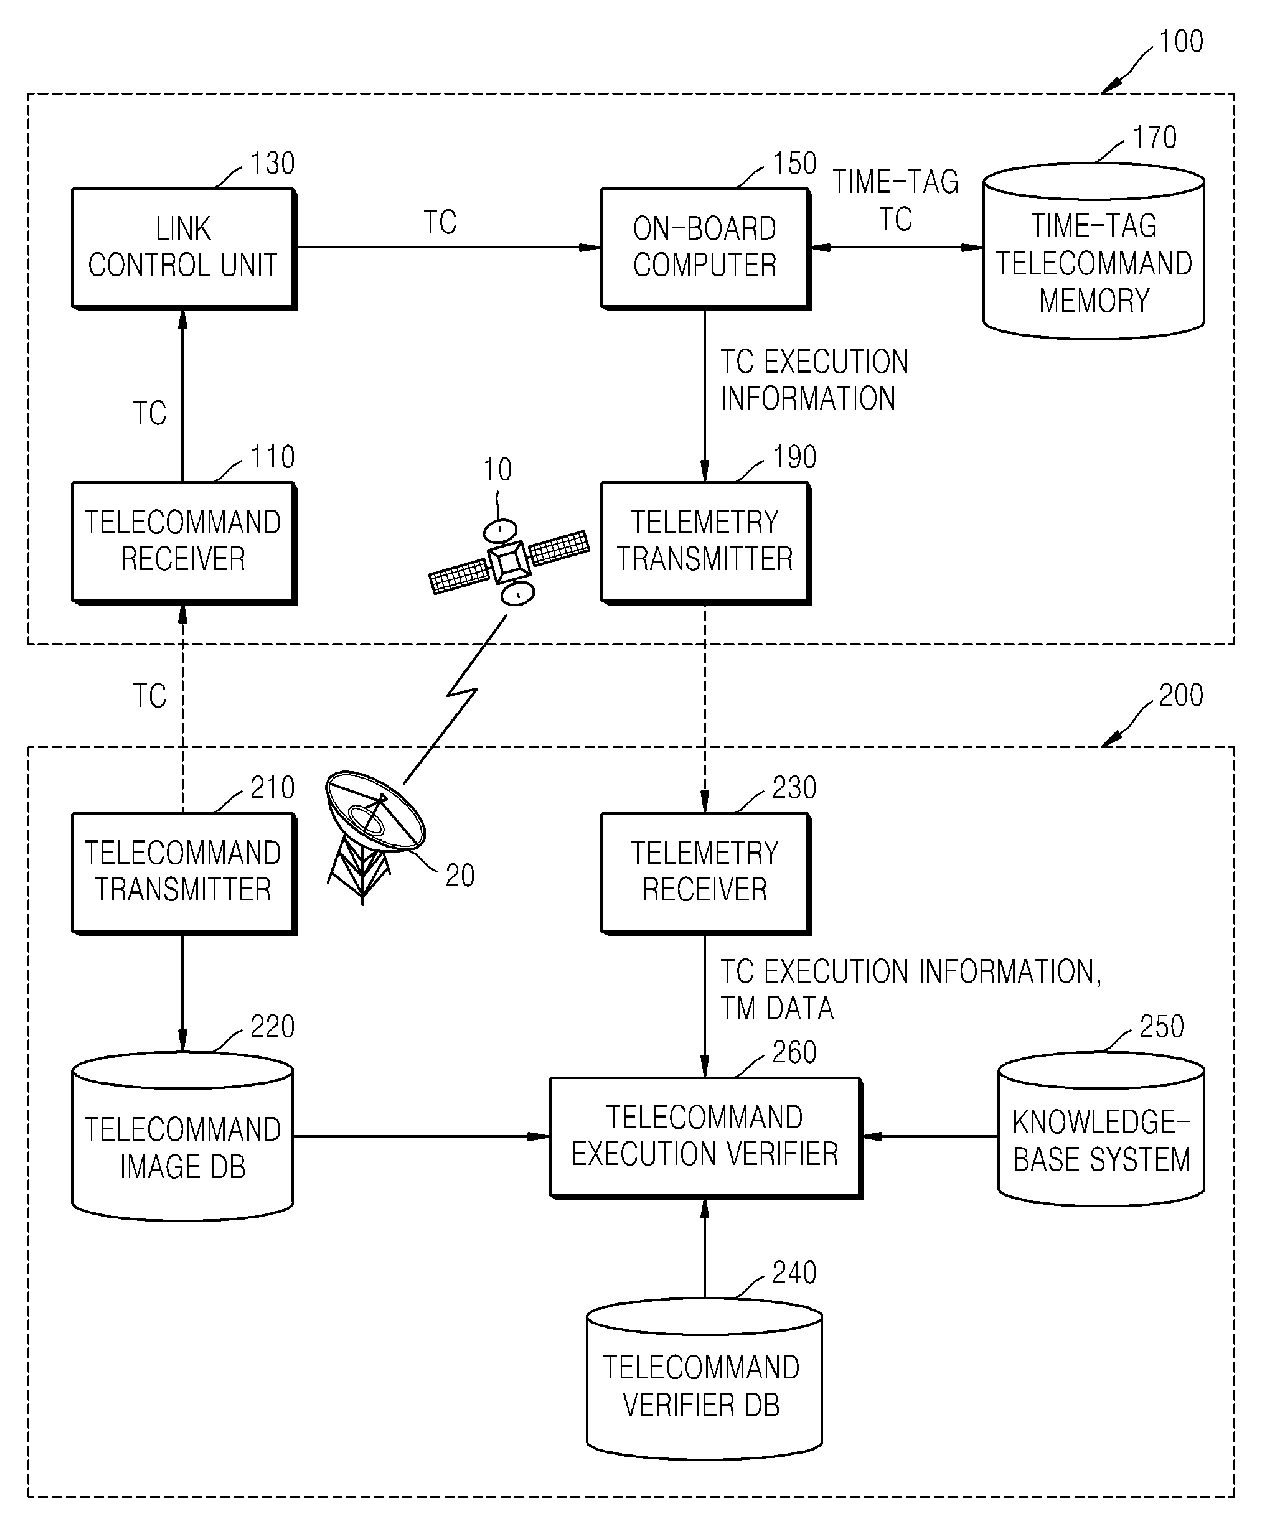 Apparatus and method for executing telecommand on geostationary satellite, and apparatus and method for verifying telecommand execution status on geostationary satellite ground control system